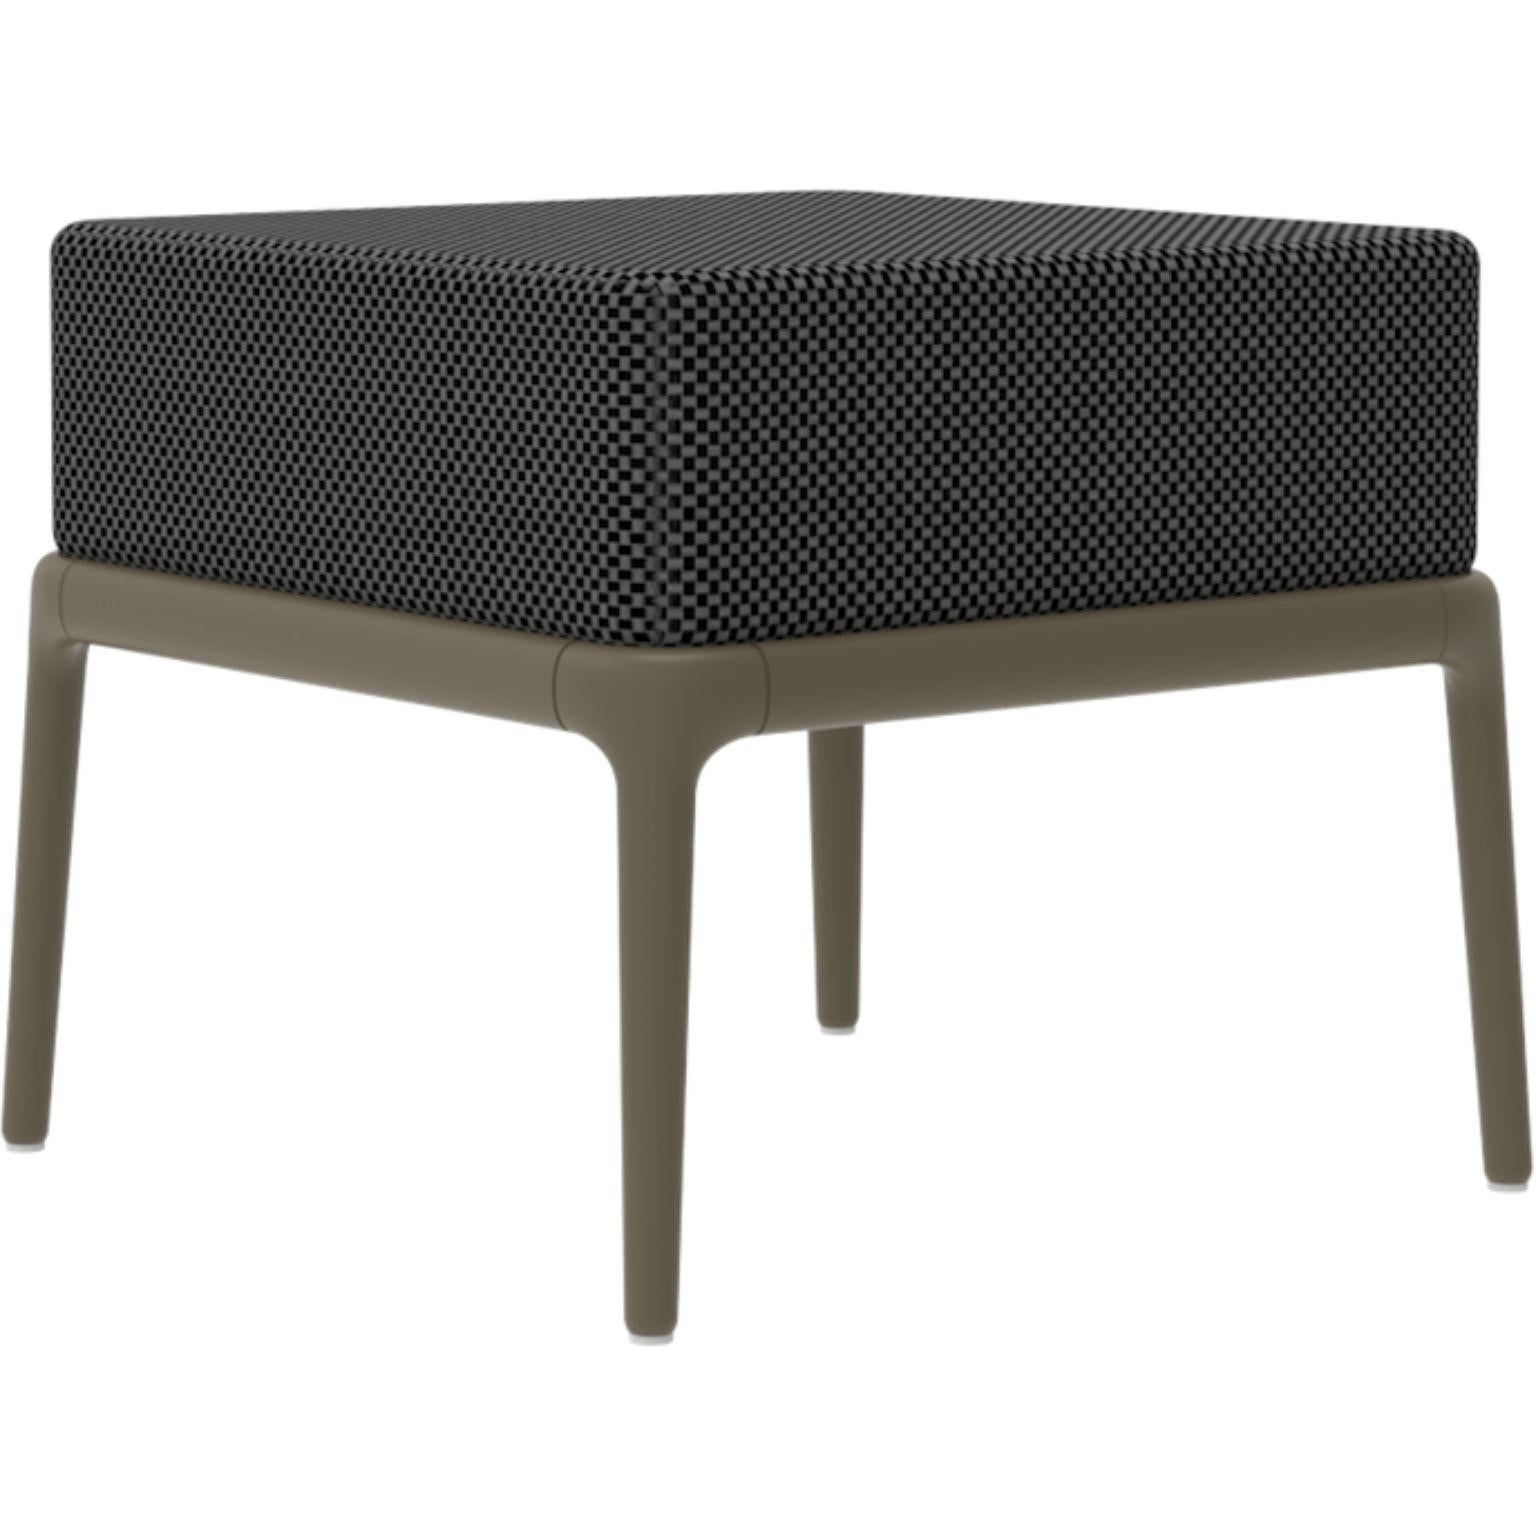 Xaloc bronze Pouf 50 by Mowee
Dimensions: D 50 x W 50 x H 43 cm
Material: Aluminium, Textile
Weight: 7 kg
Also available in different colours and finishes.

 Xaloc synthesizes the lines of interior furniture to extrapolate to the exterior,